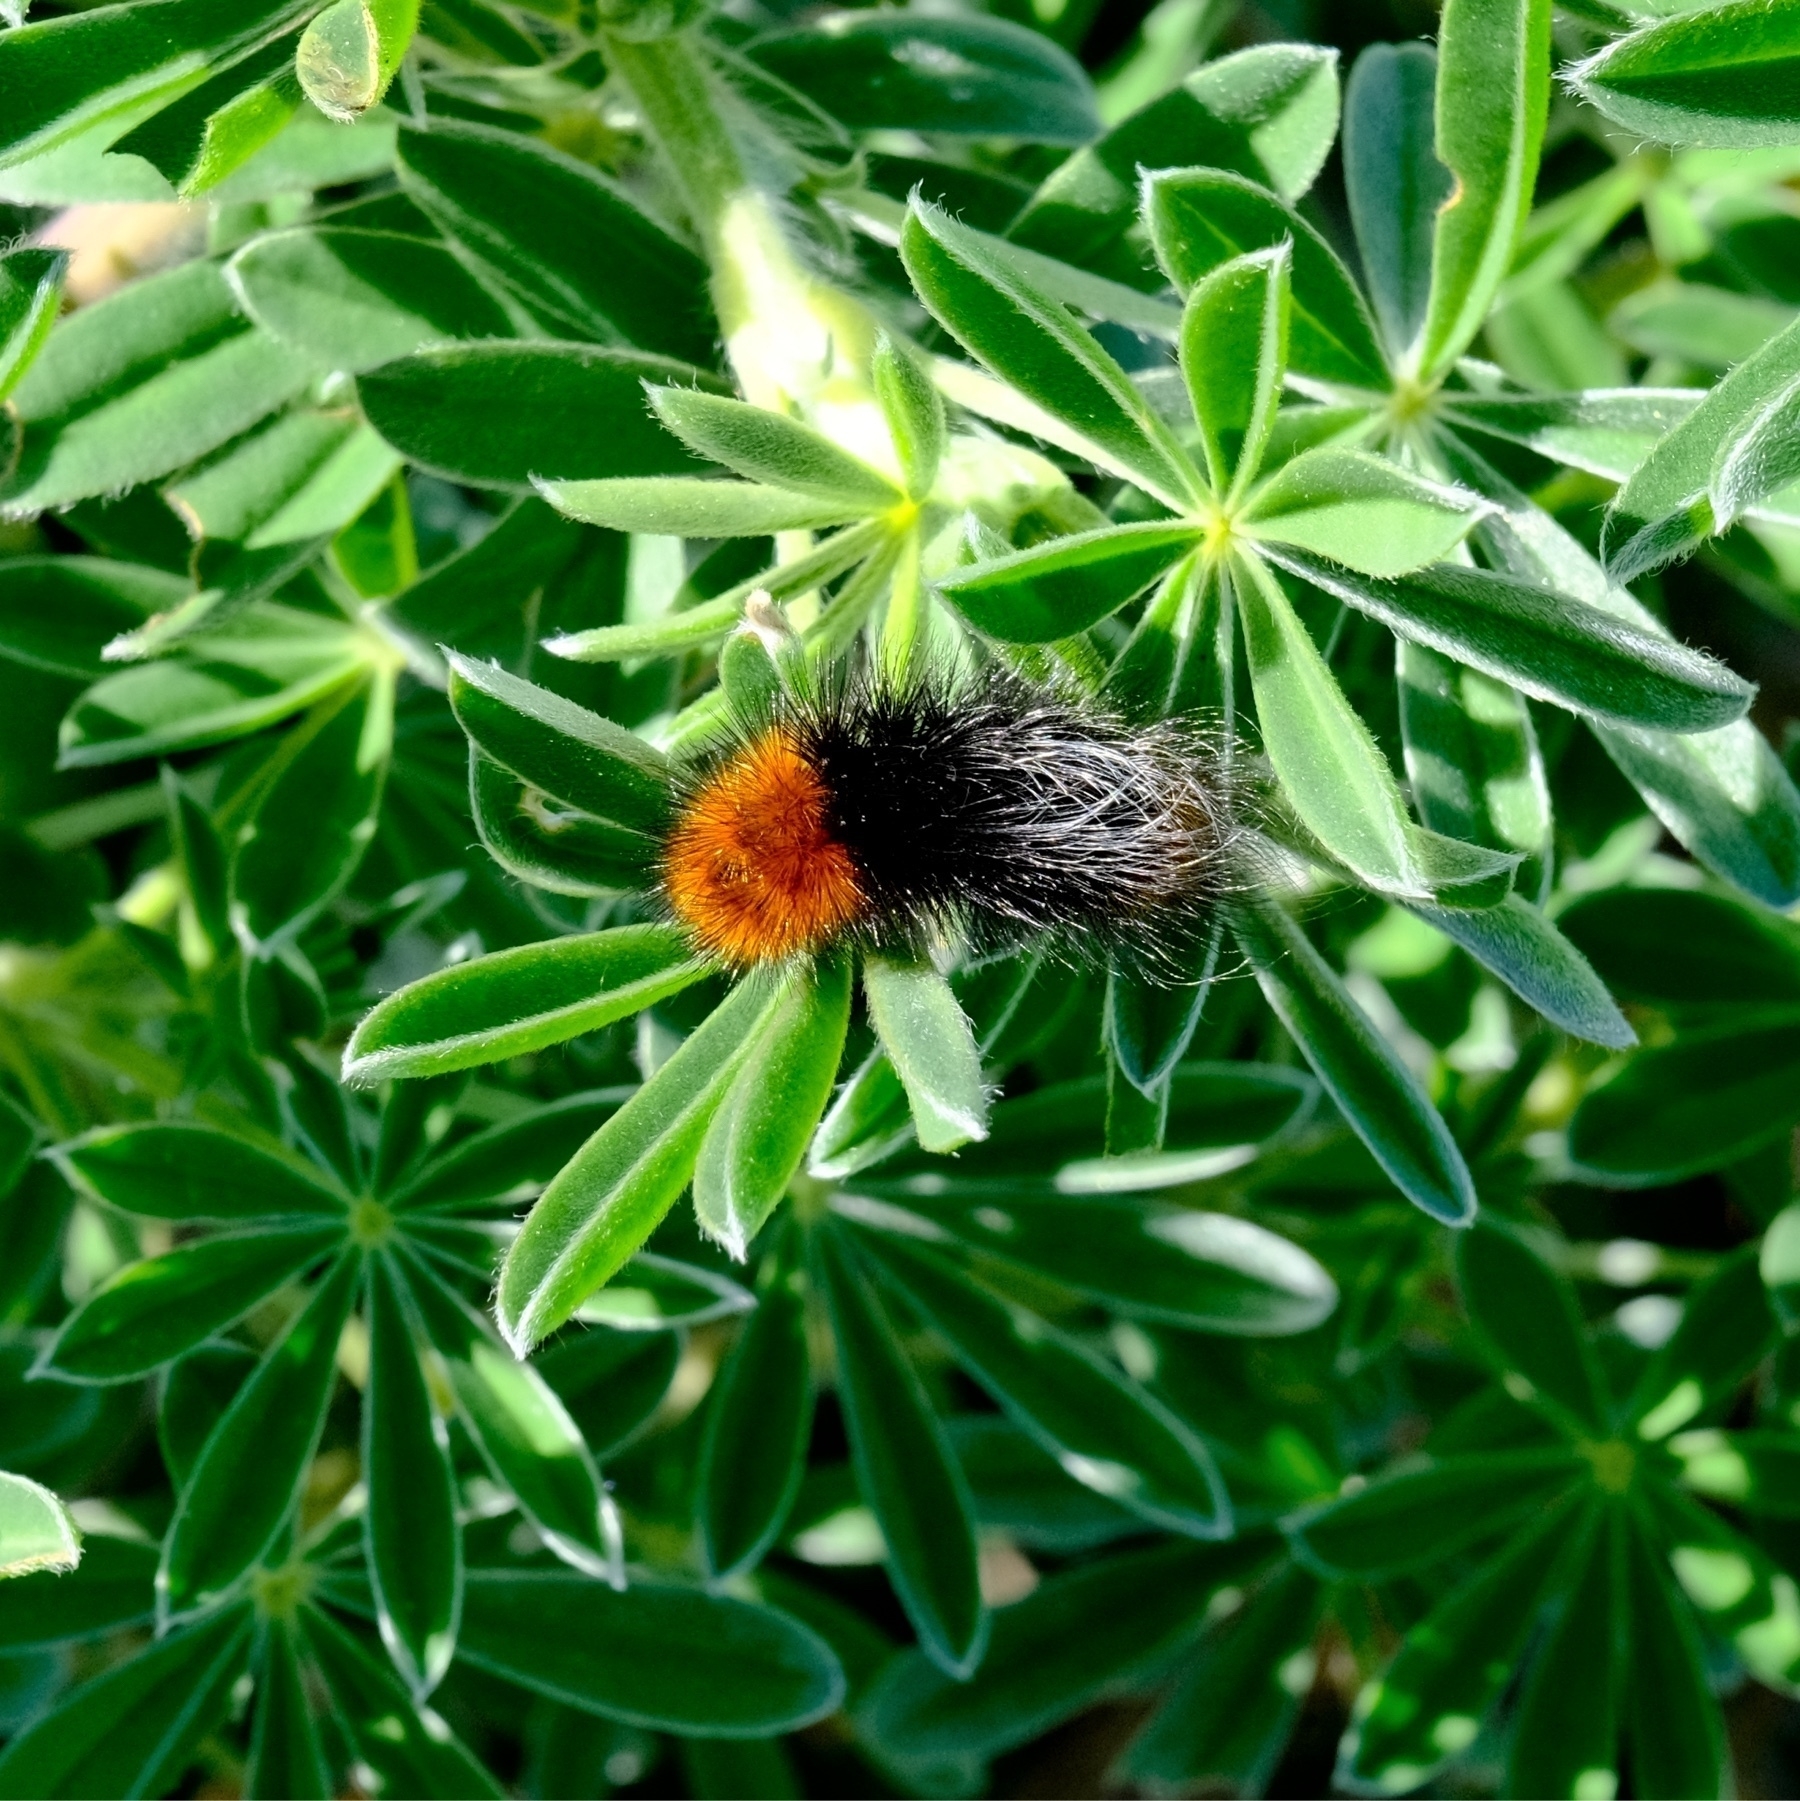 red and black fuzzy caterpillar on slender pinnate lupine leaves.